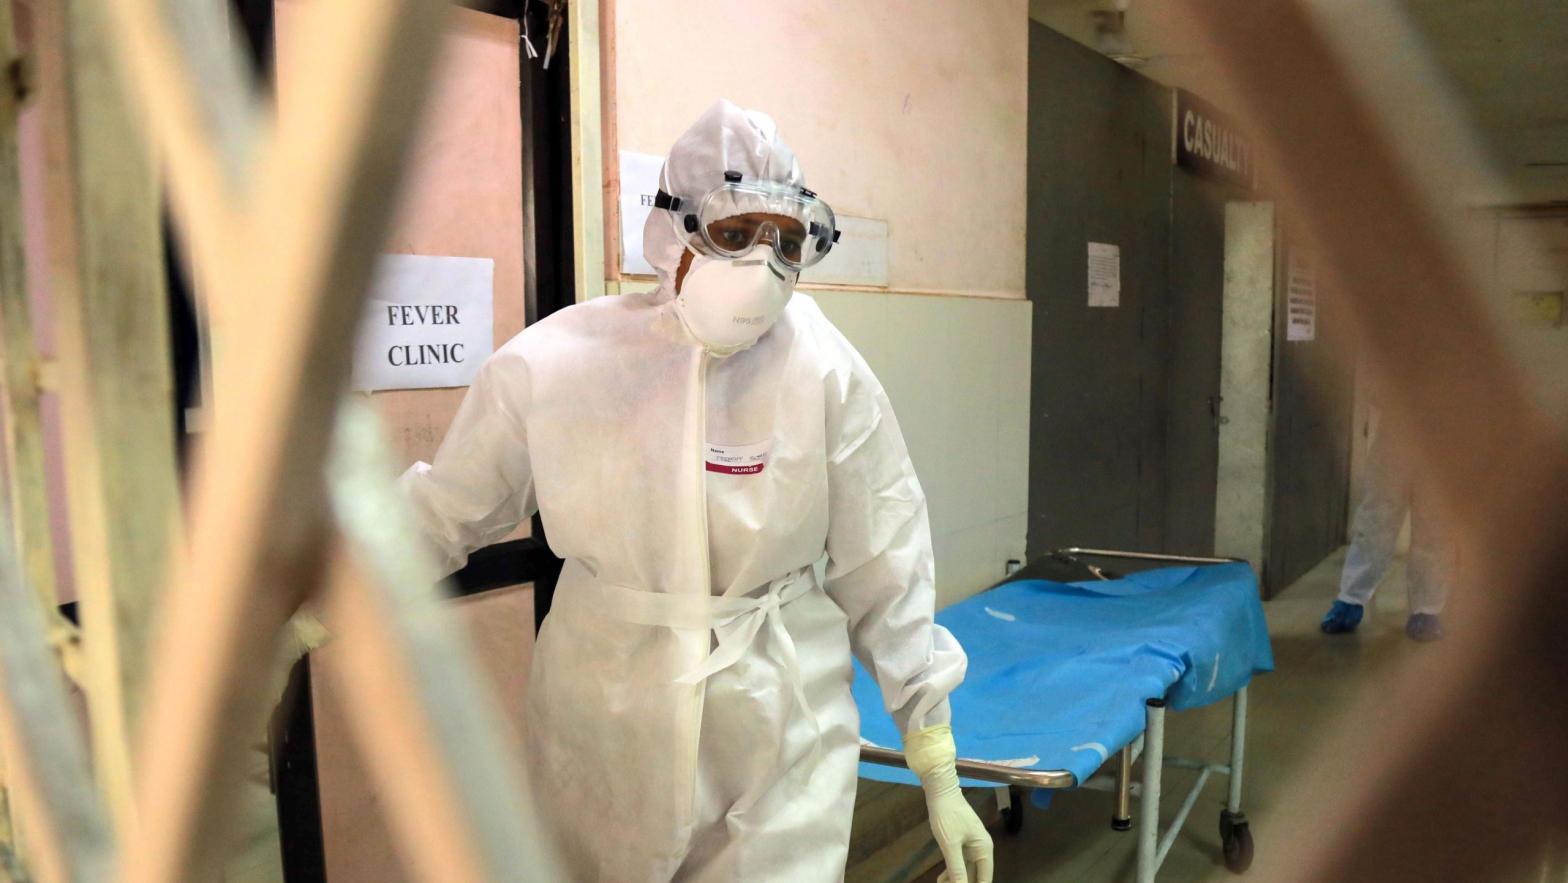 Health officials in full protective gear walk inside an isolation ward of Ernakulam Medical College in Kerala on June 6, 2019. The 2019 outbreak ultimately involved only one reported case, who successfully recovered.  (Photo: STR/AFP, Getty Images)